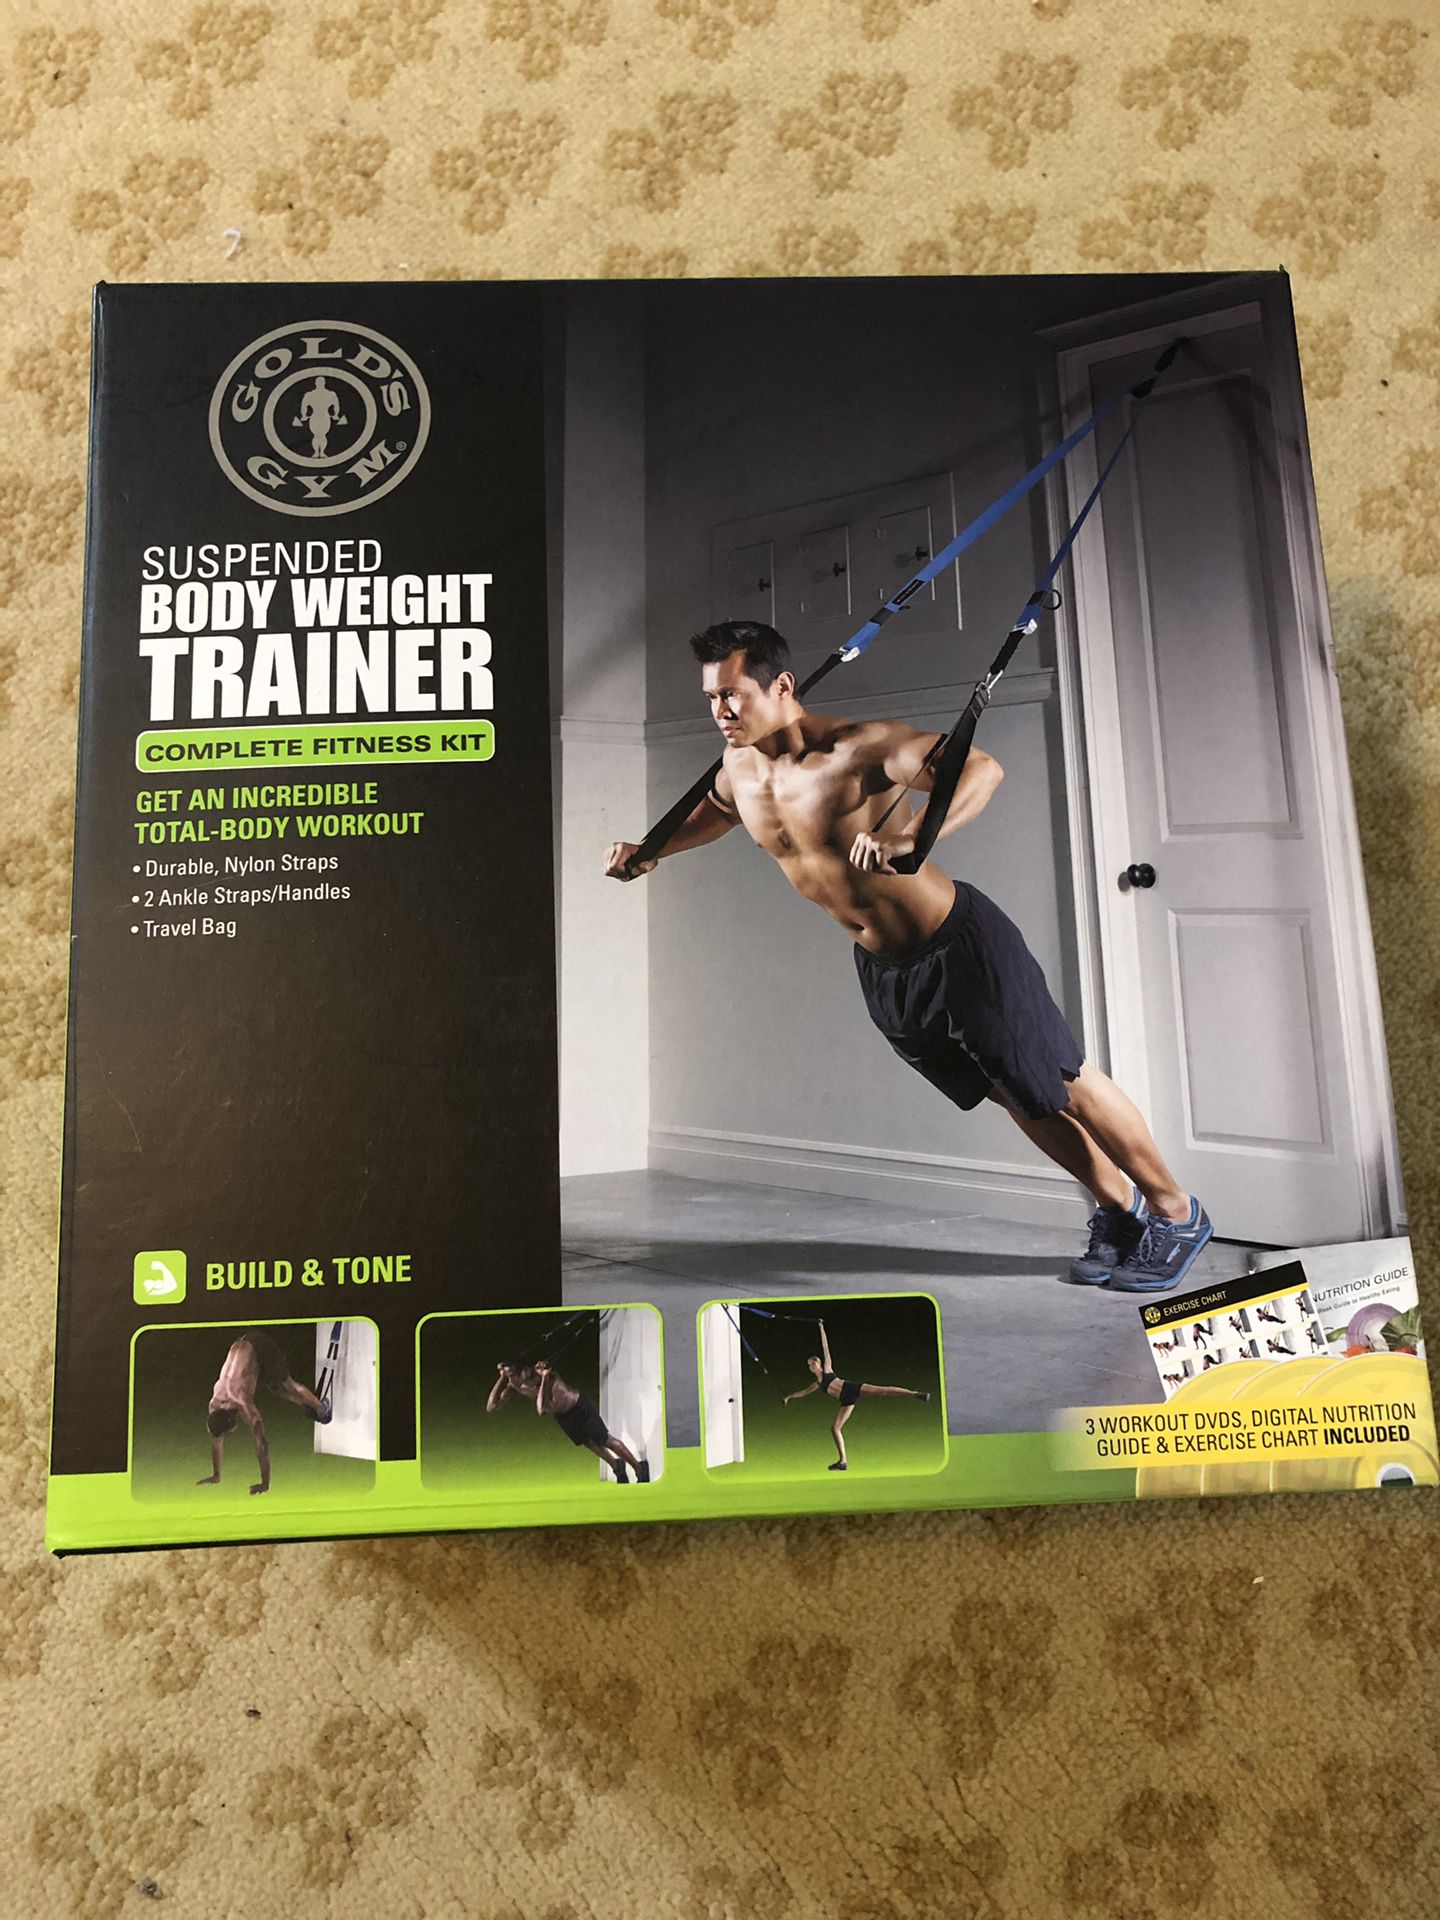 Gold’s Gym Suspended Body Weight Trainer Fitness Kit